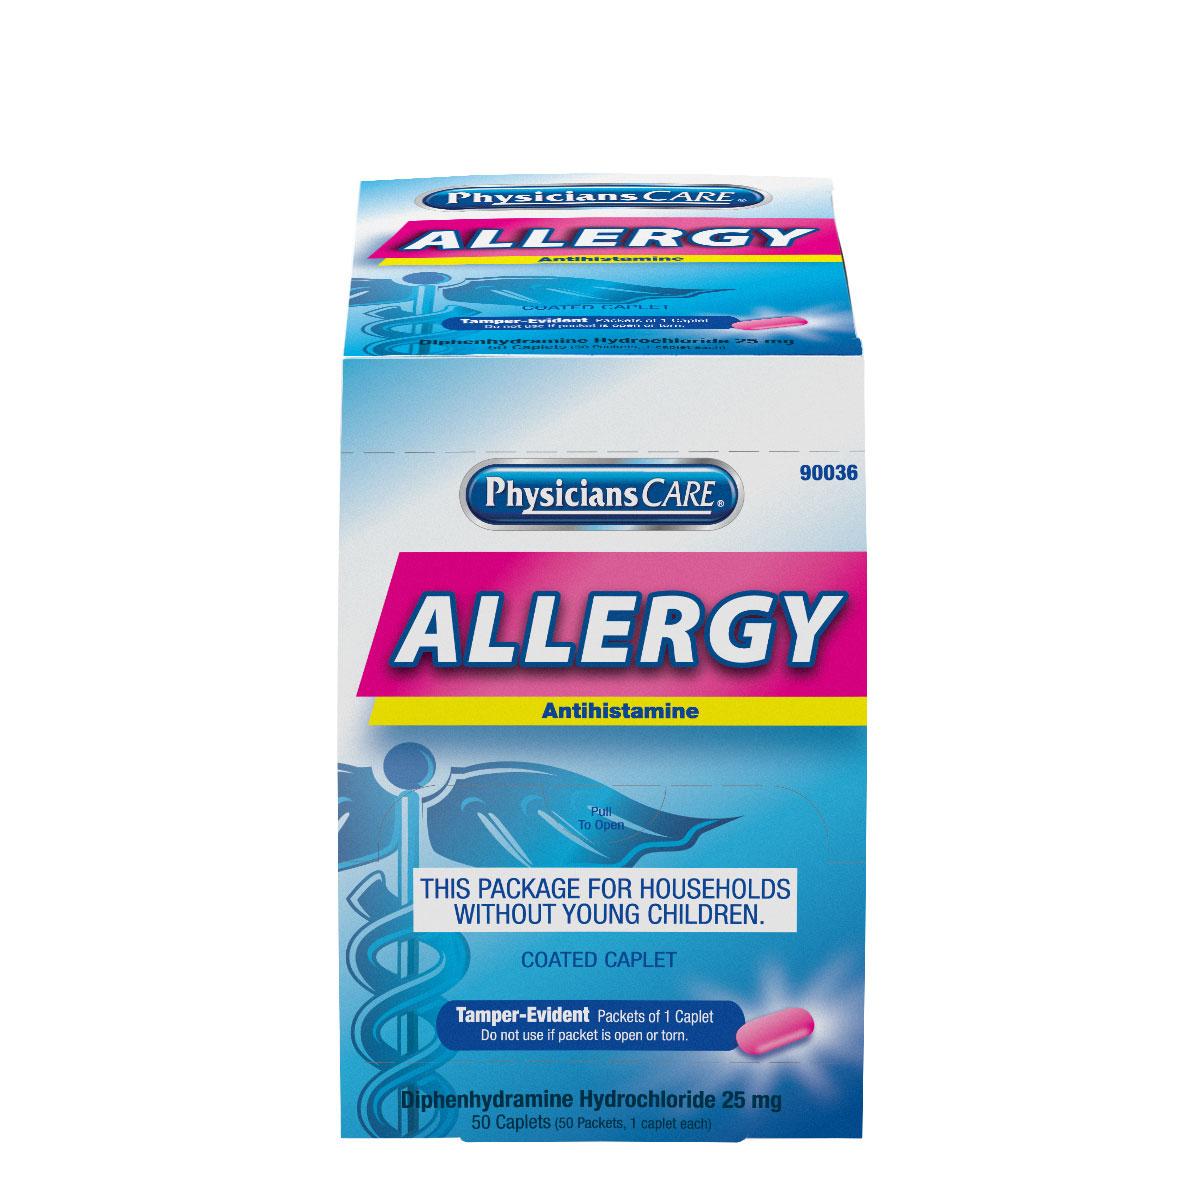 PhysiciansCare Allergy, Allergy Plus and Cold and Cough